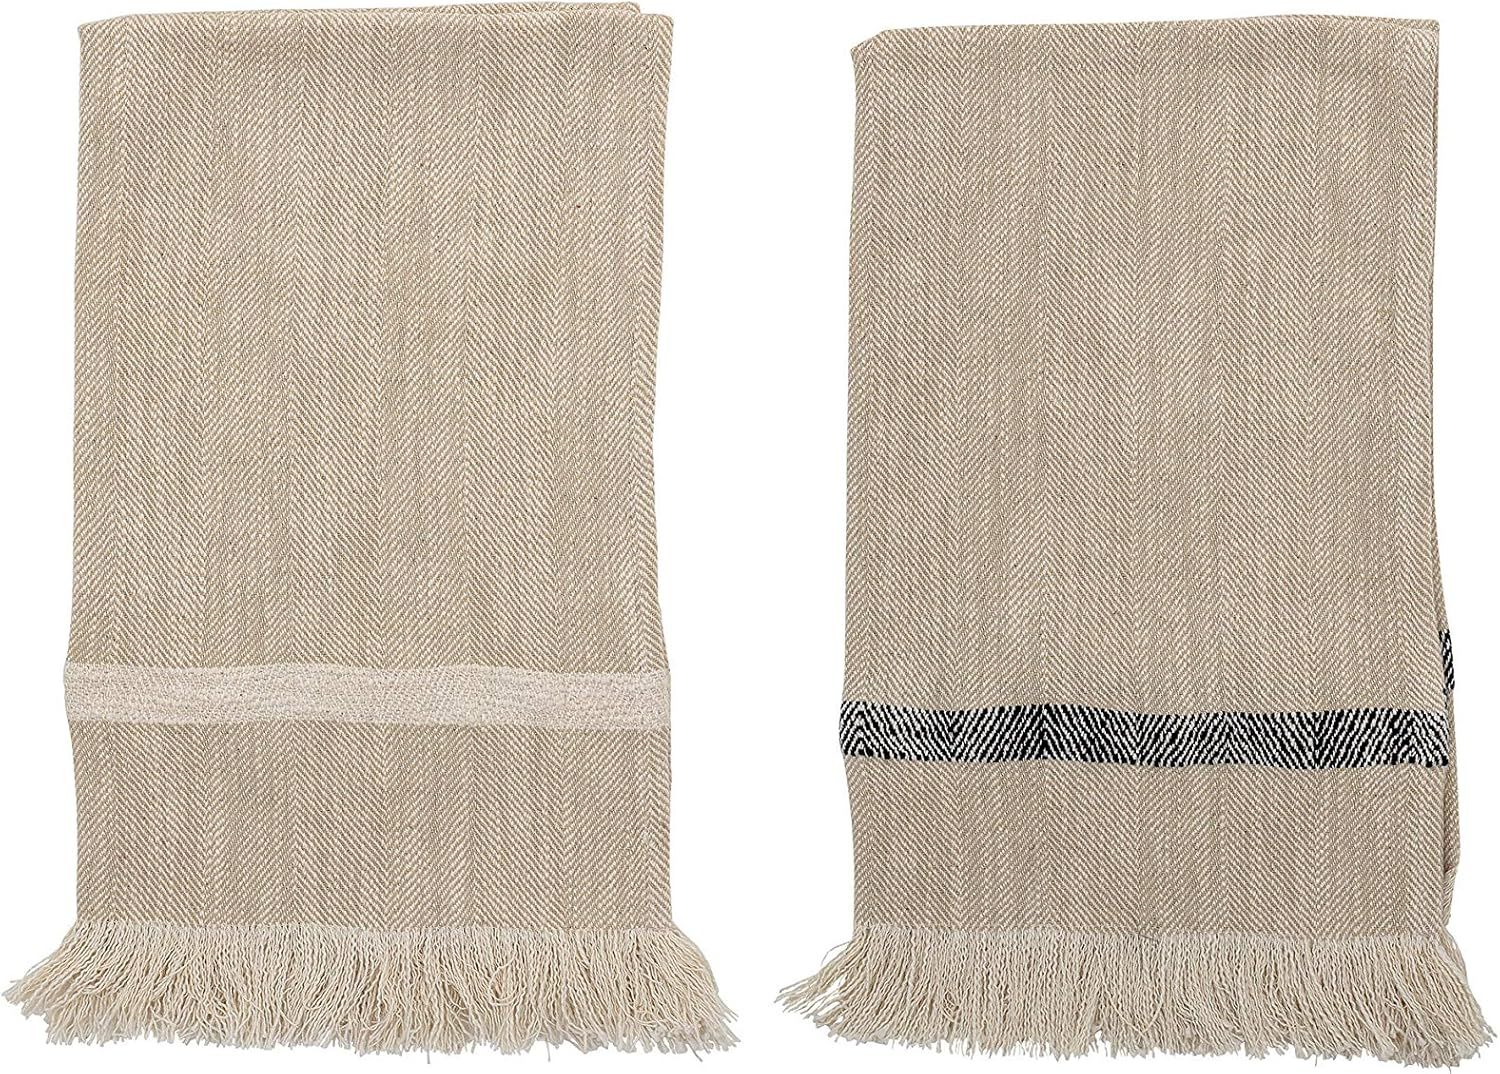 Bloomingville Woven Cotton Striped Tea Tassels (Set of 2) Towels, Natural | Amazon (US)